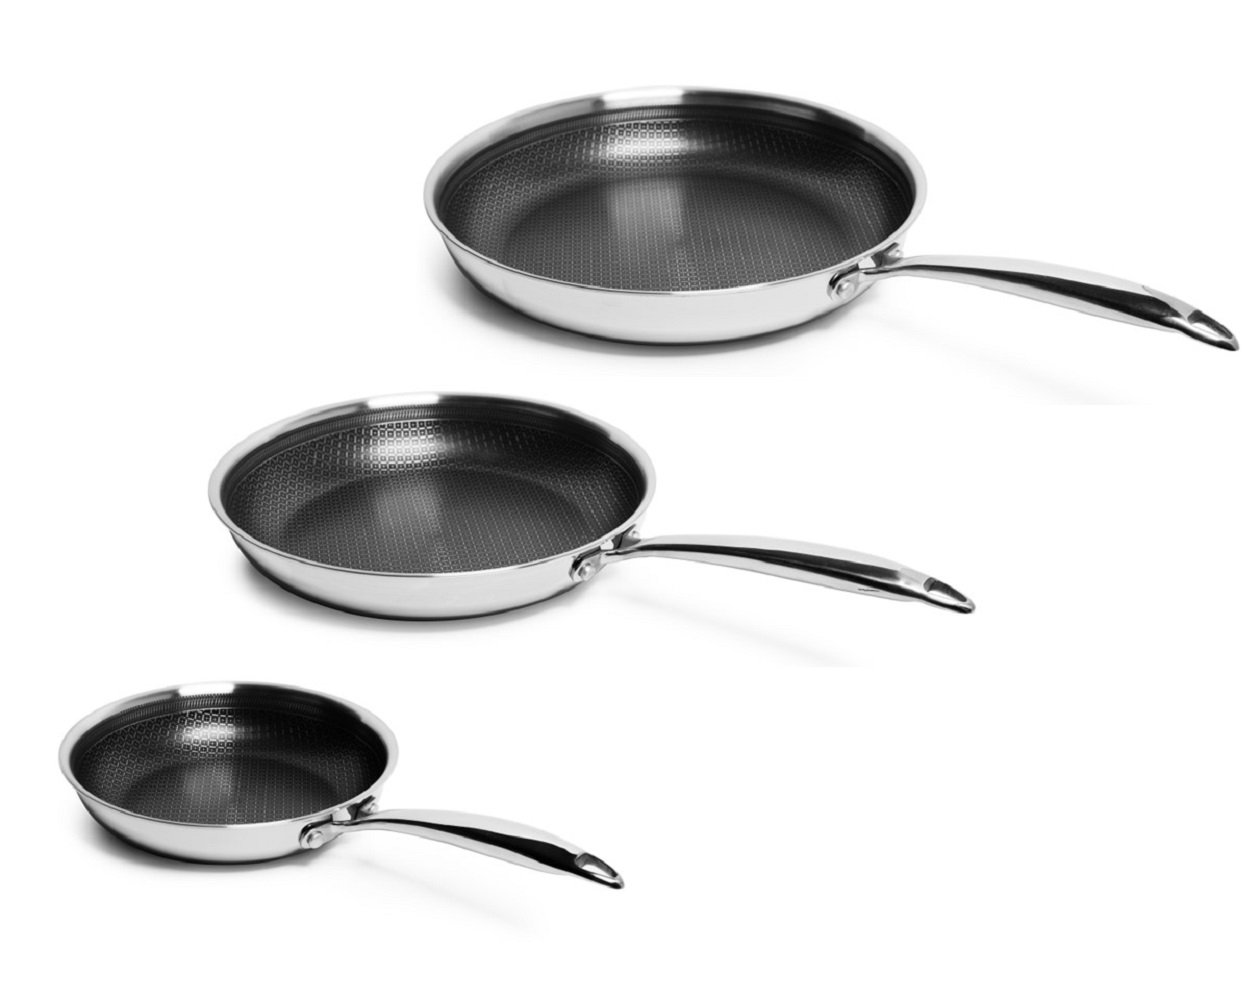  Copper Chef Titan Pan, Try Ply Stainless Steel Non-Stick Frying  Pans, 5-Piece Cookware Set, 11 Inch and 8 Inch Pan: Home & Kitchen